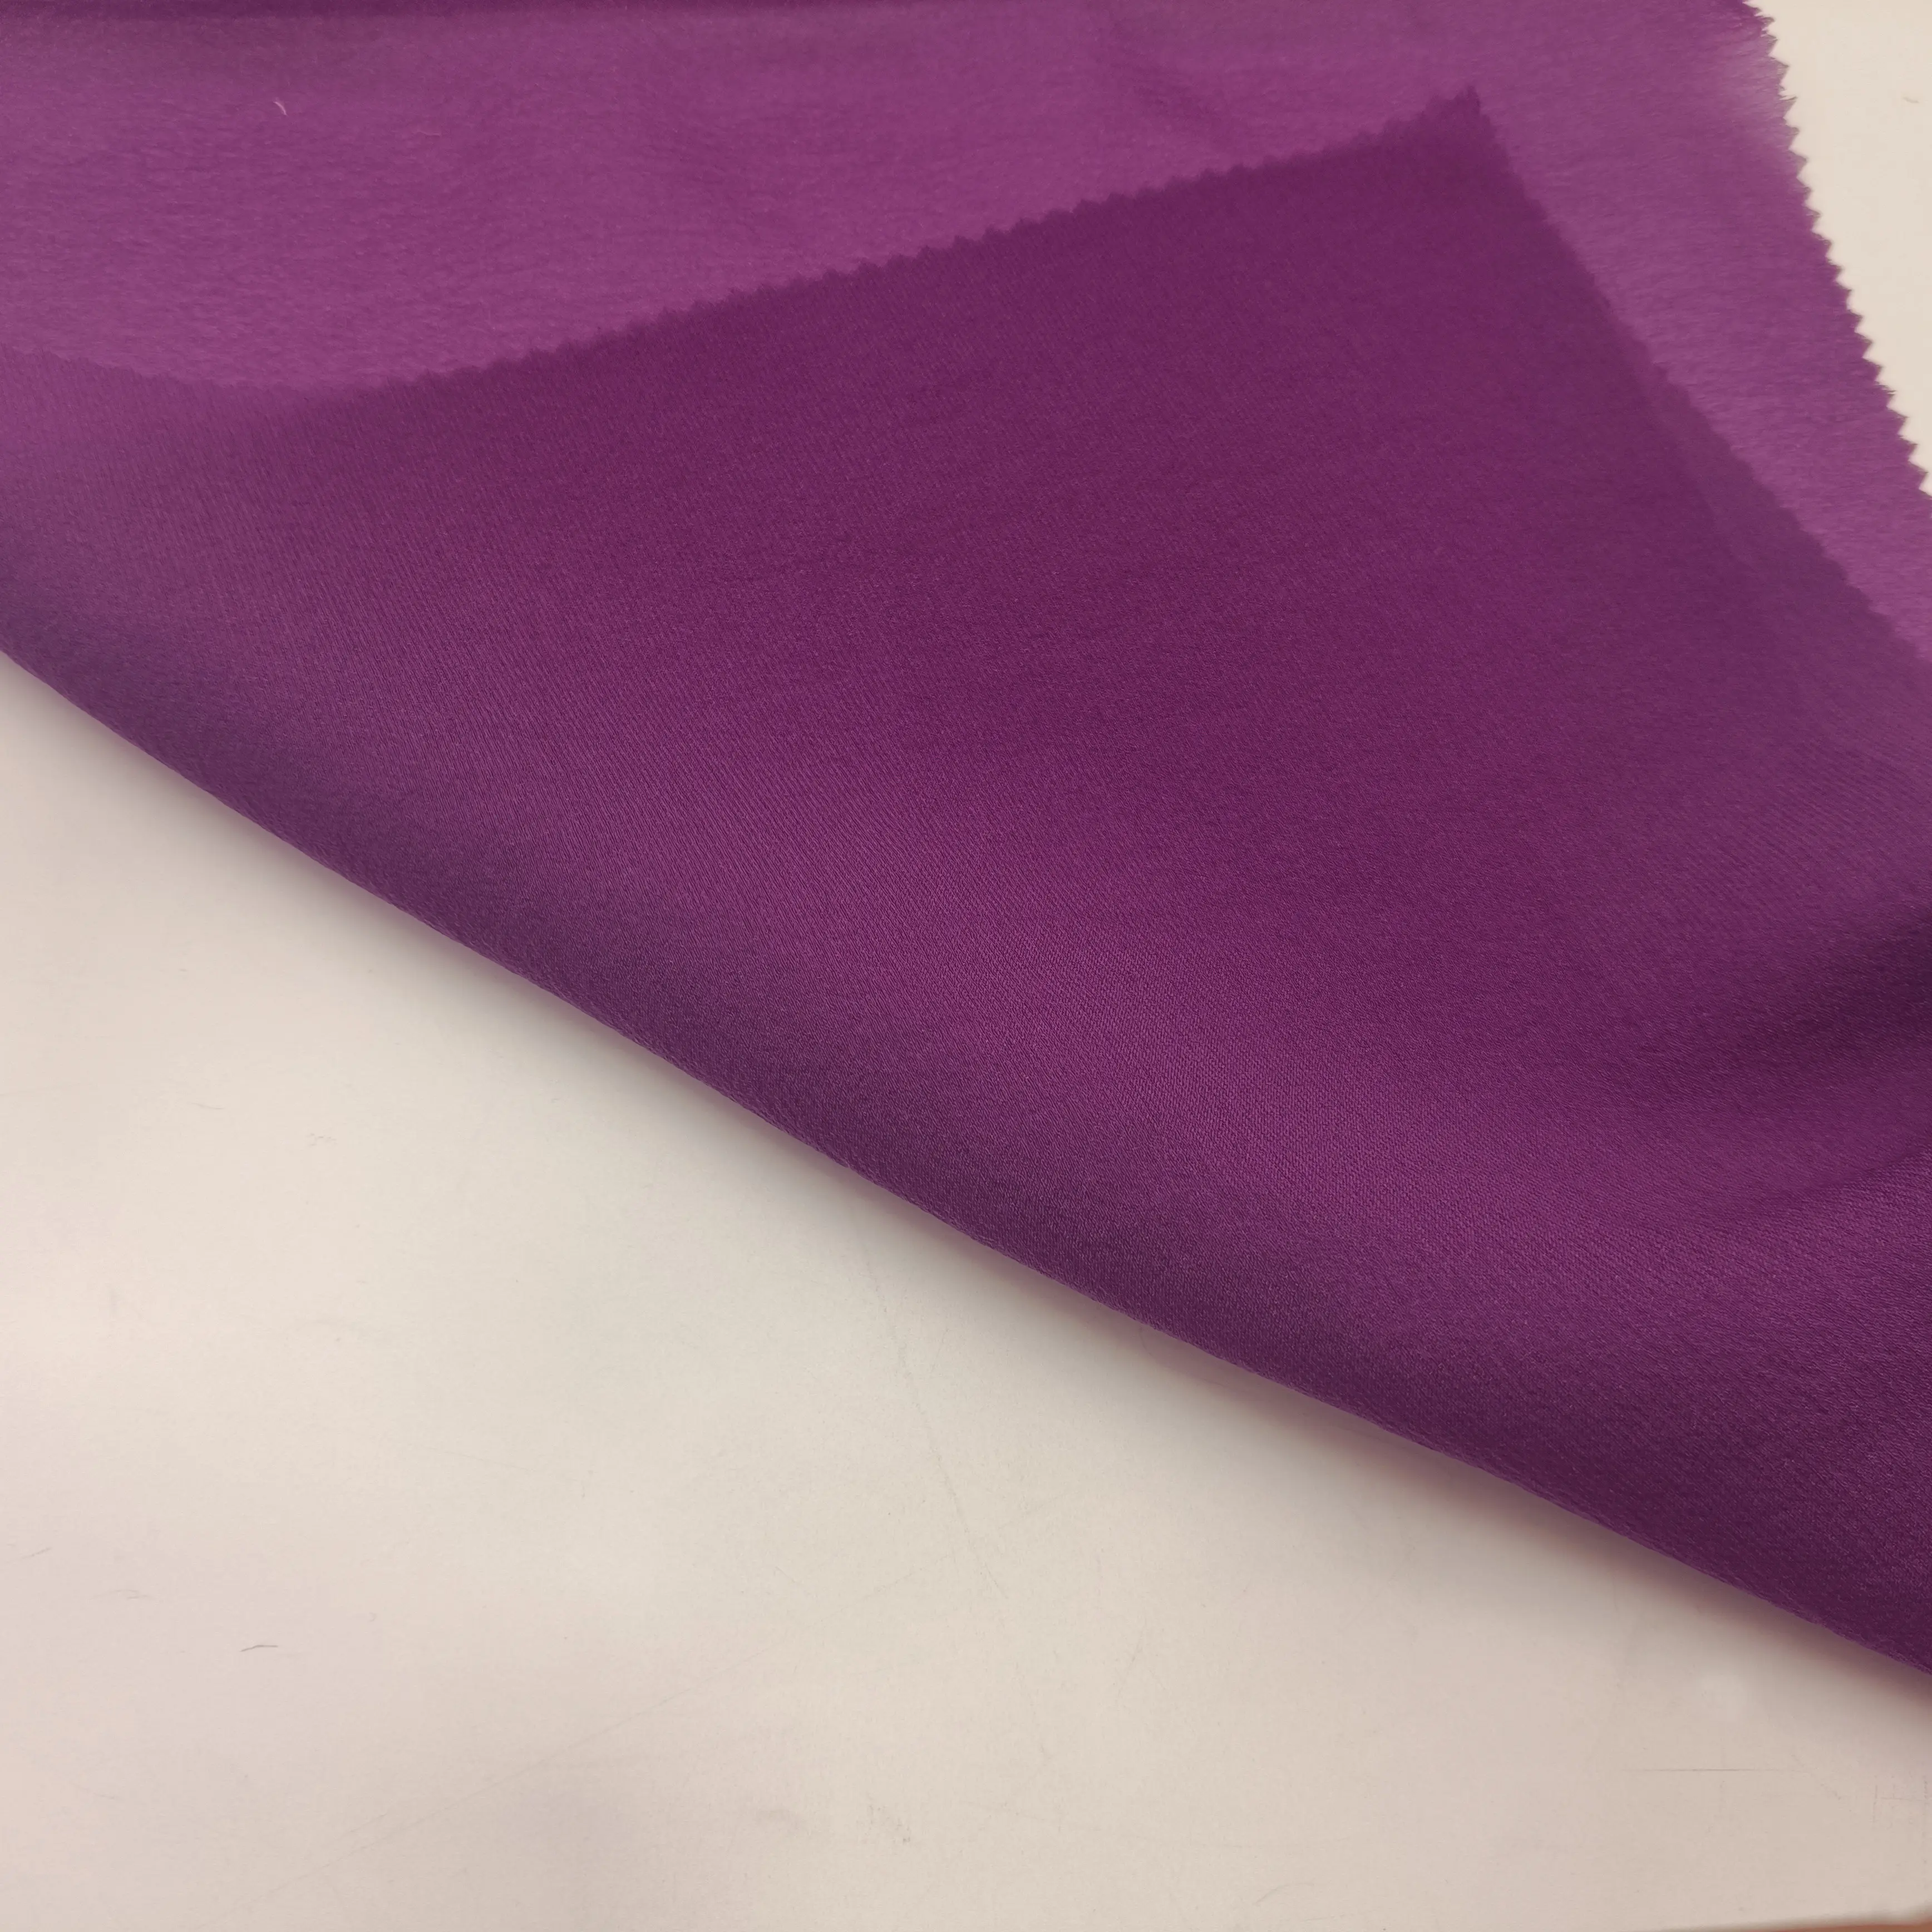 100T polyester stiff and stylish women's clothing fabric that is not easy to wrinkle, starry twill